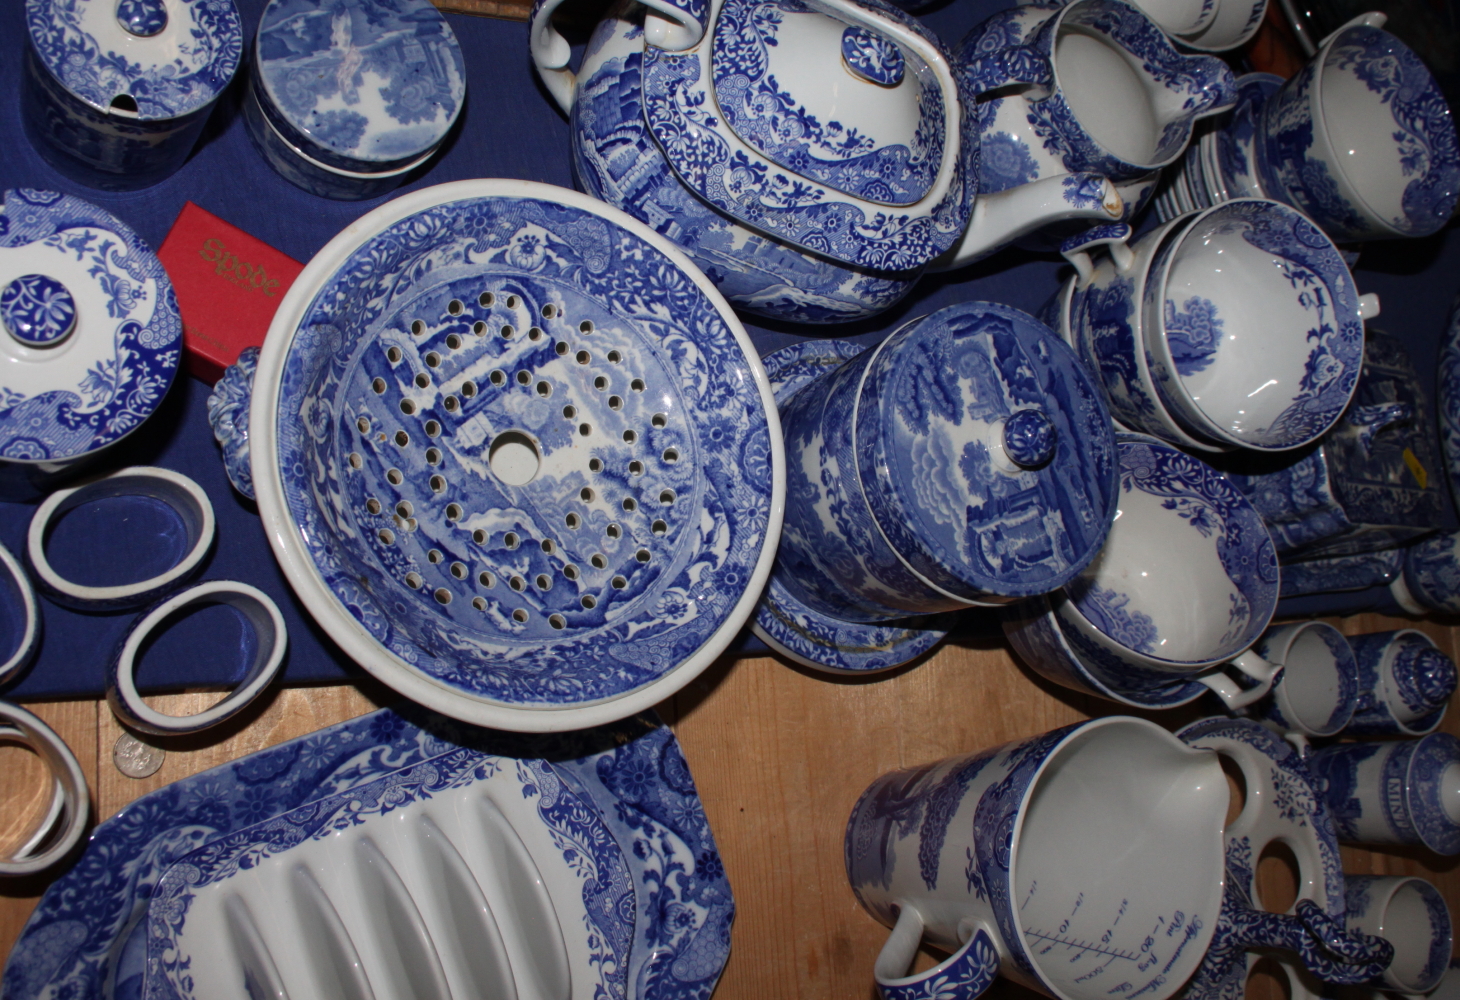 A Copeland Spode "Italian" pattern combination service, including bowls, teapots, teacups, a - Image 8 of 47